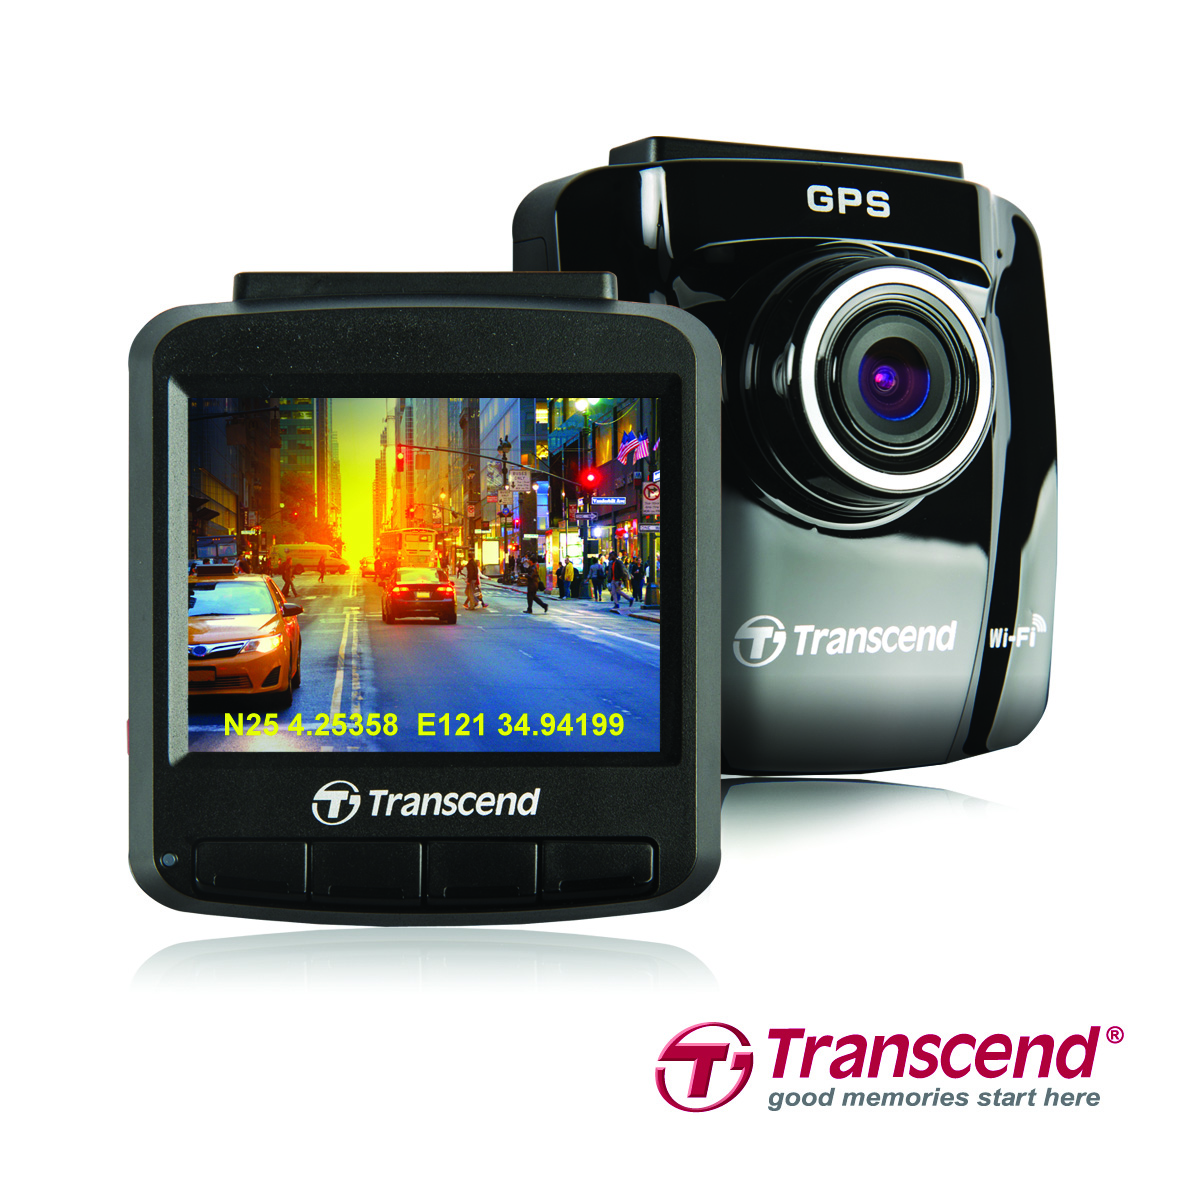 Transcend Releases DrivePro 220 Car Video Recorder with Built-in GPS  Receiver and Wi-Fi Connectivity - Transcend Information, Inc.